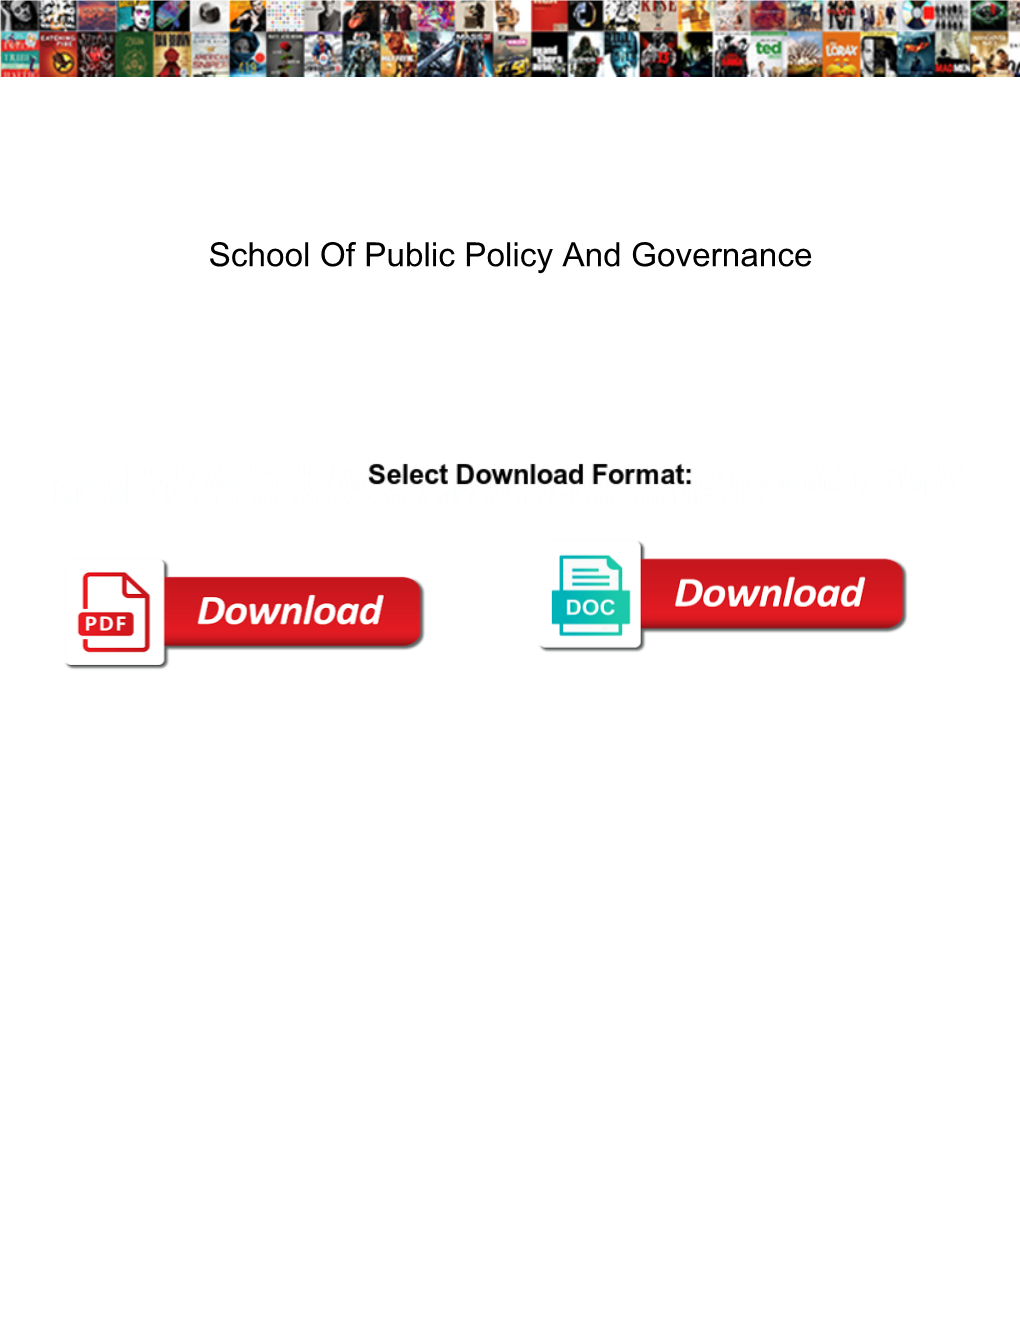 School of Public Policy and Governance